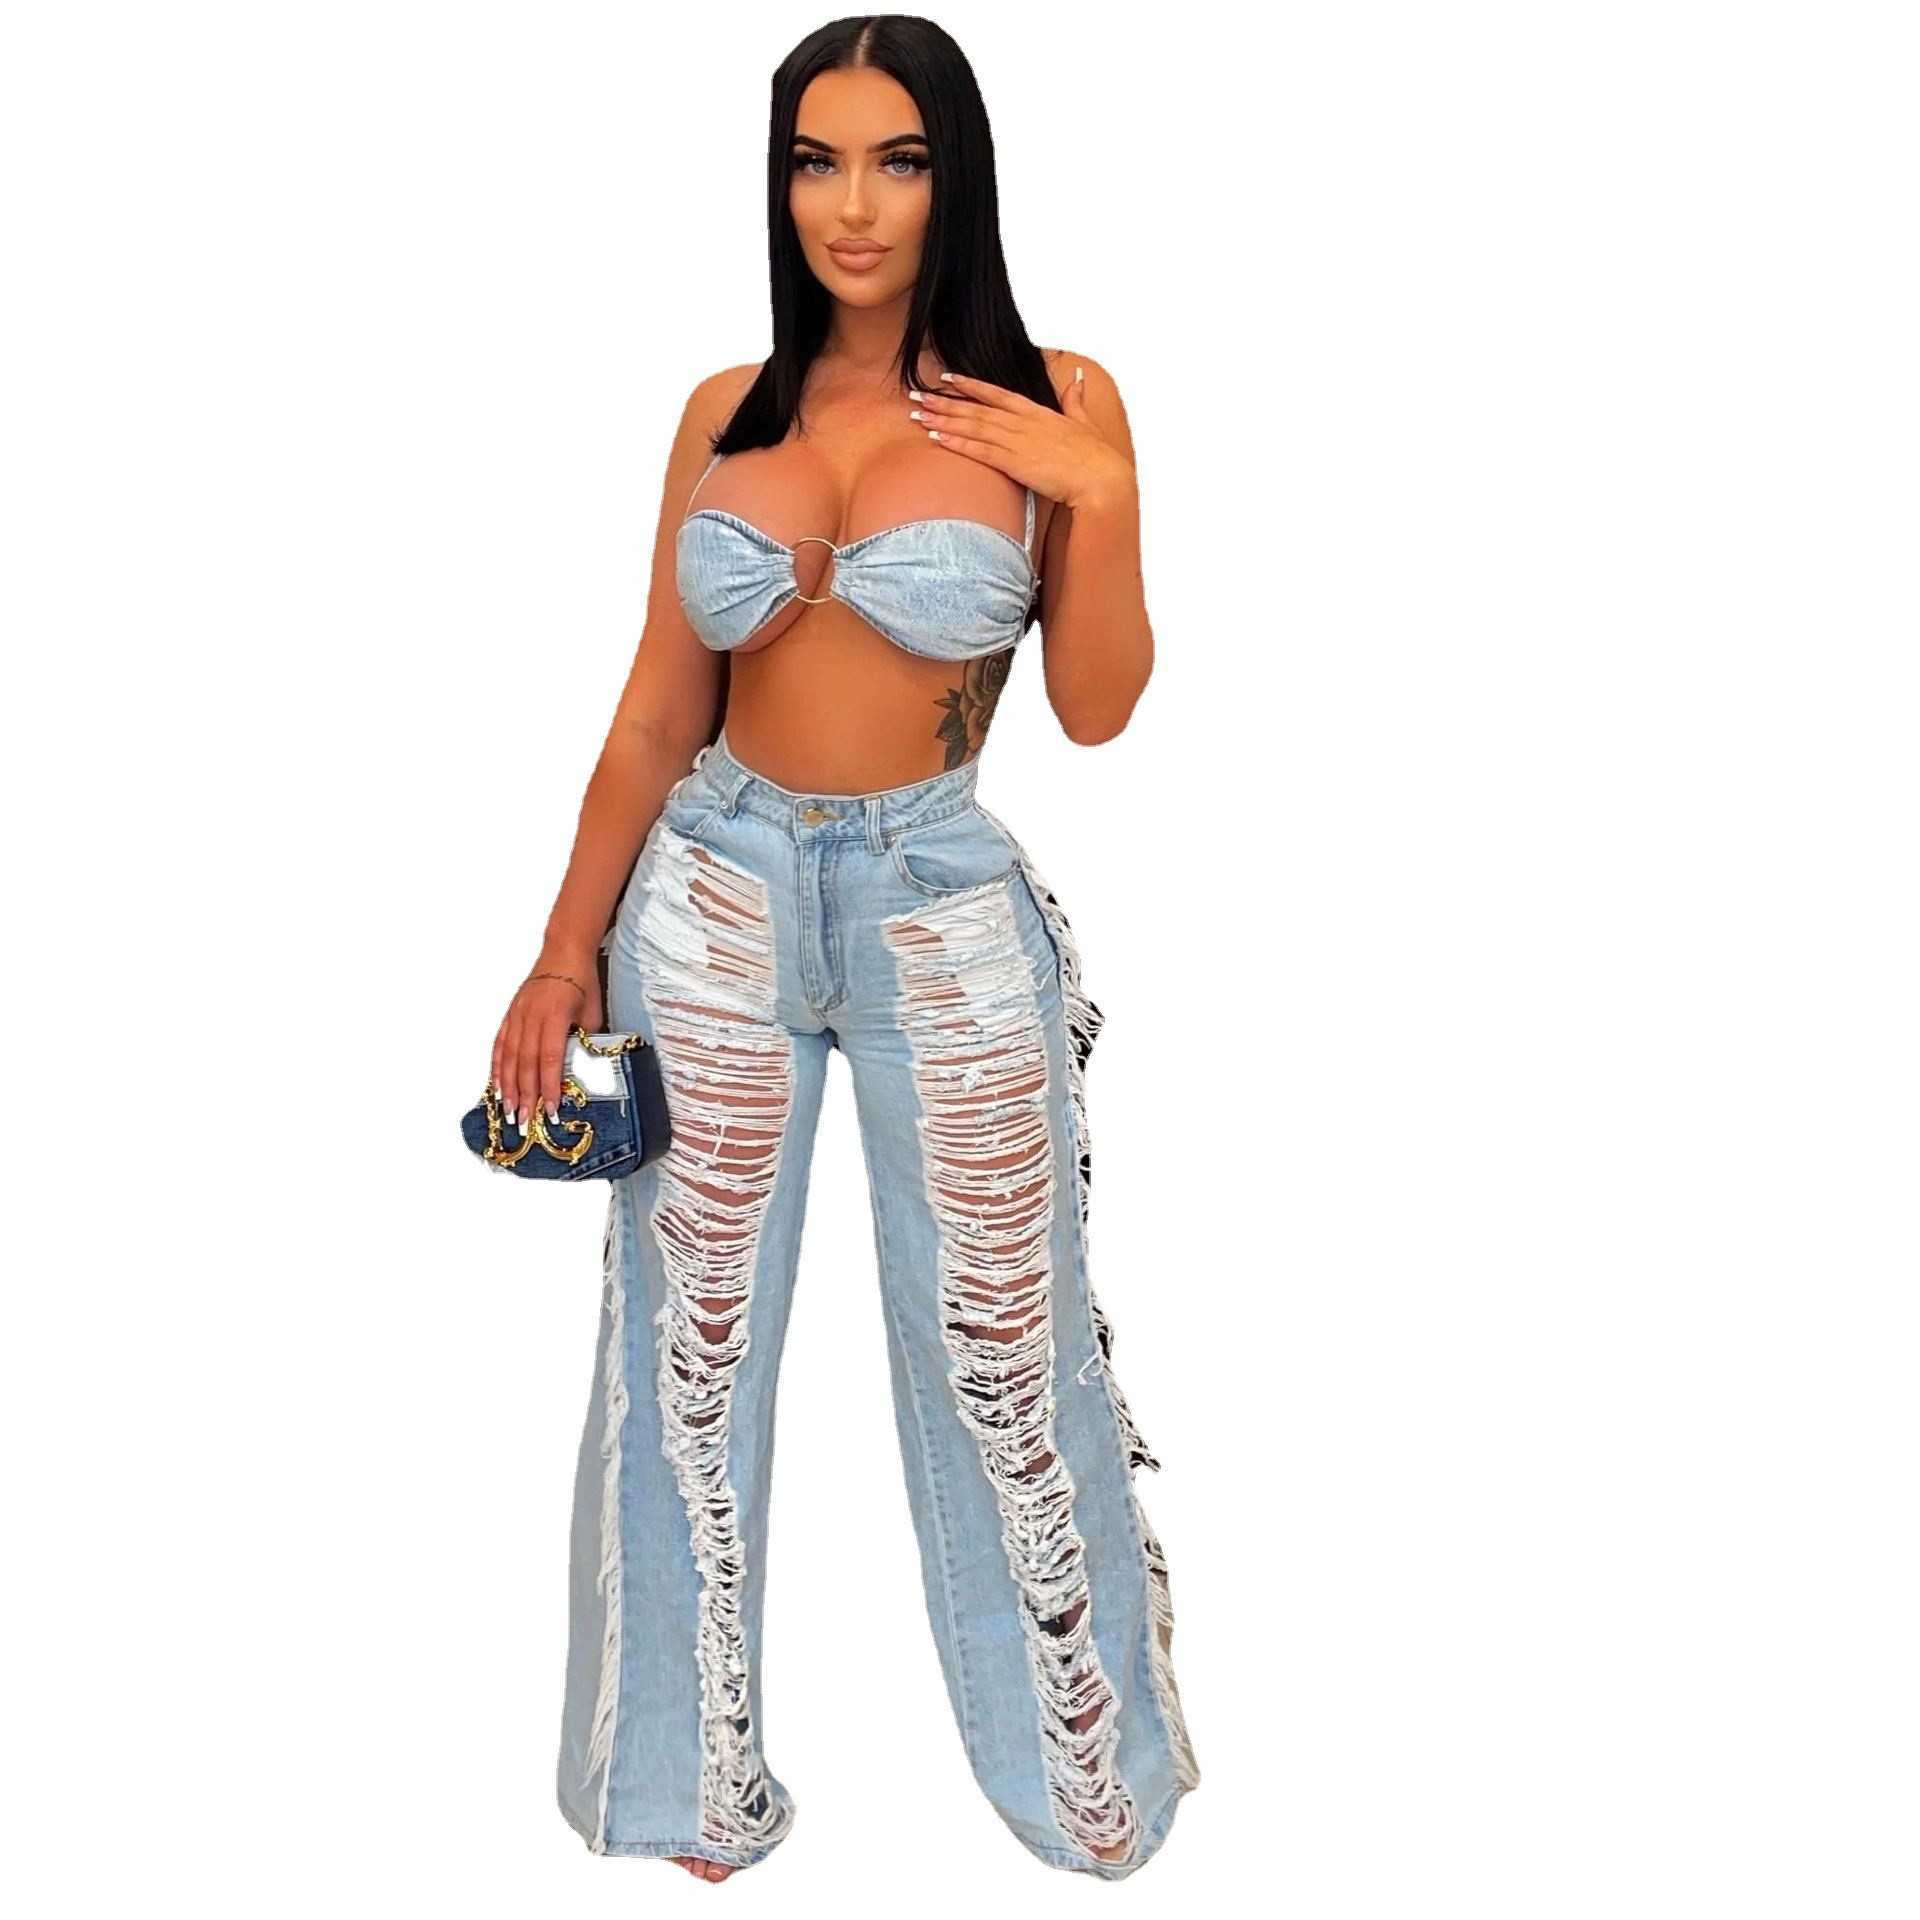 Two Piece Dress Echoine New Sexy Denim Two Piece Set Lace Up Ring Bra Top Hollow Out Hole Tassel Jeans Summer Party Night Clubwear Outfits T230113